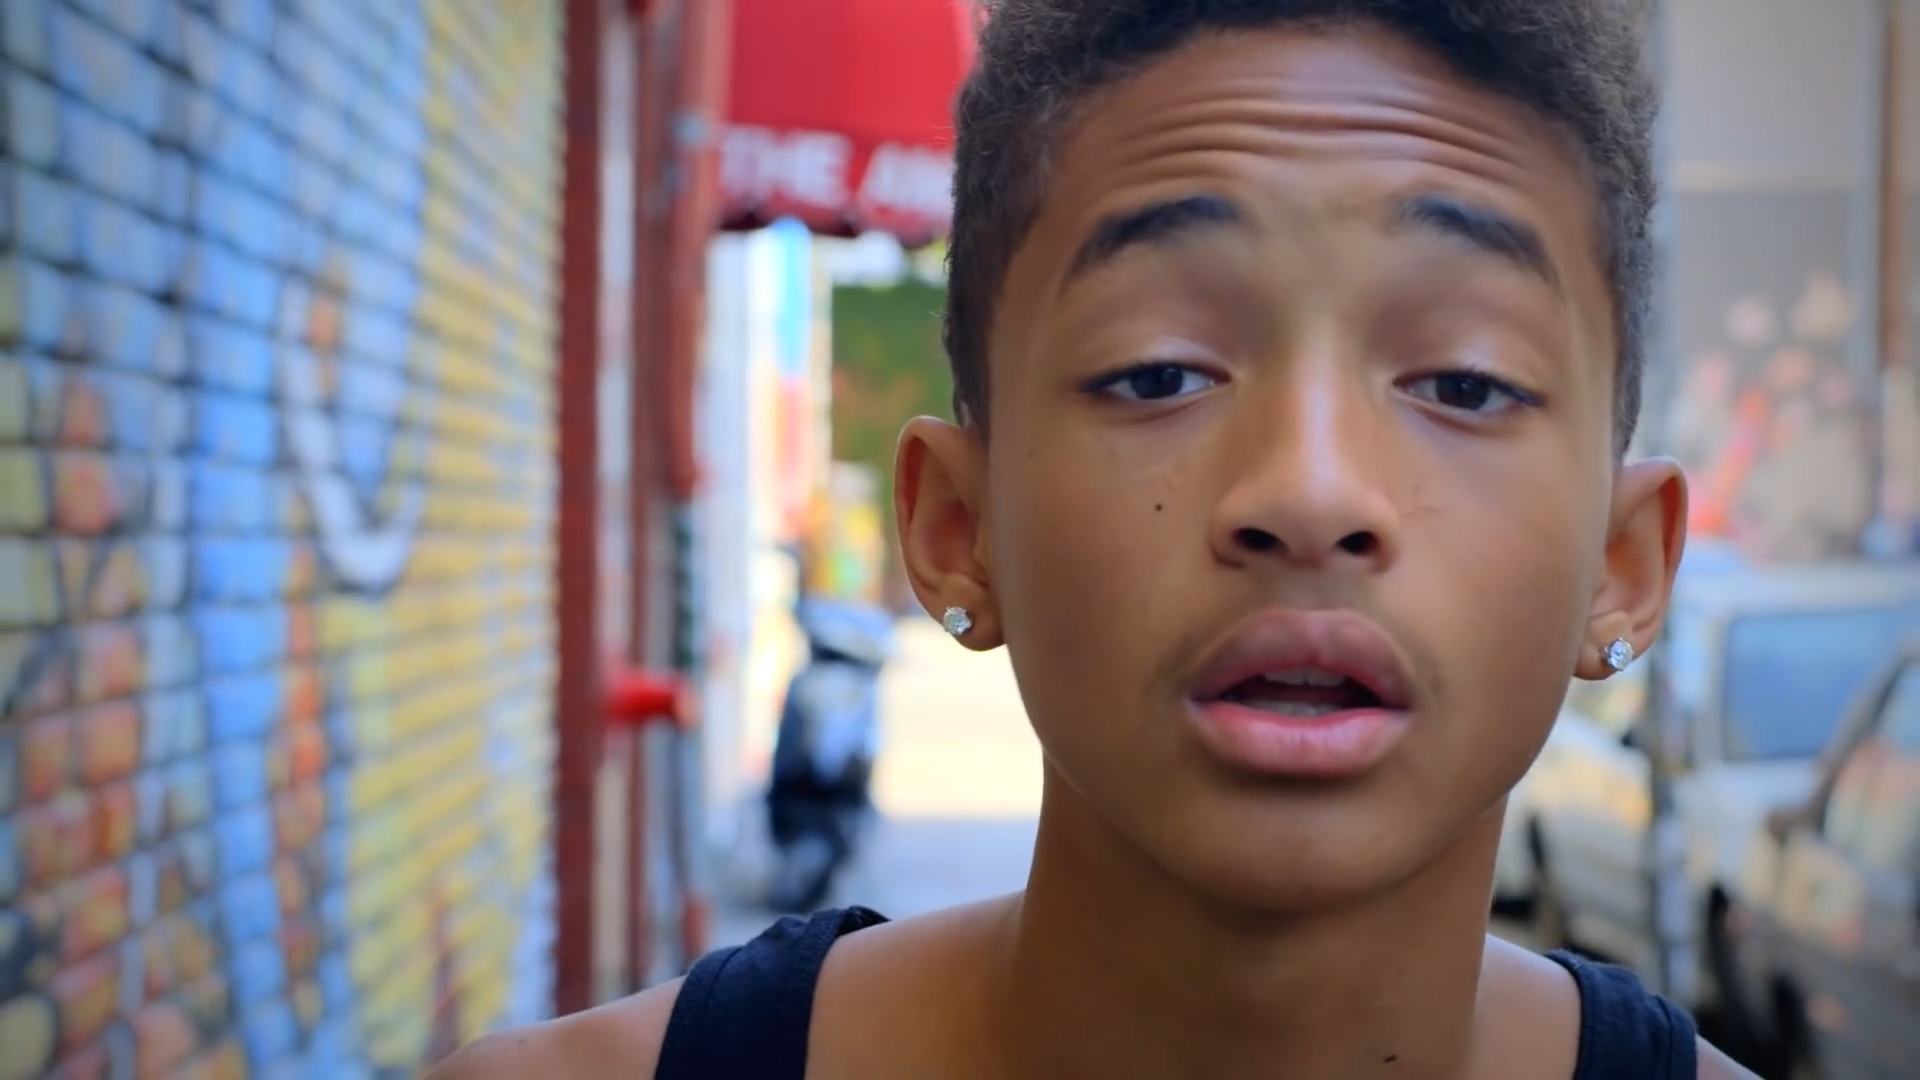 Picture Of Jaden Smith In Music Video The Coolest Jaden Smith 1643333318 Teen Idols 4 You 1281